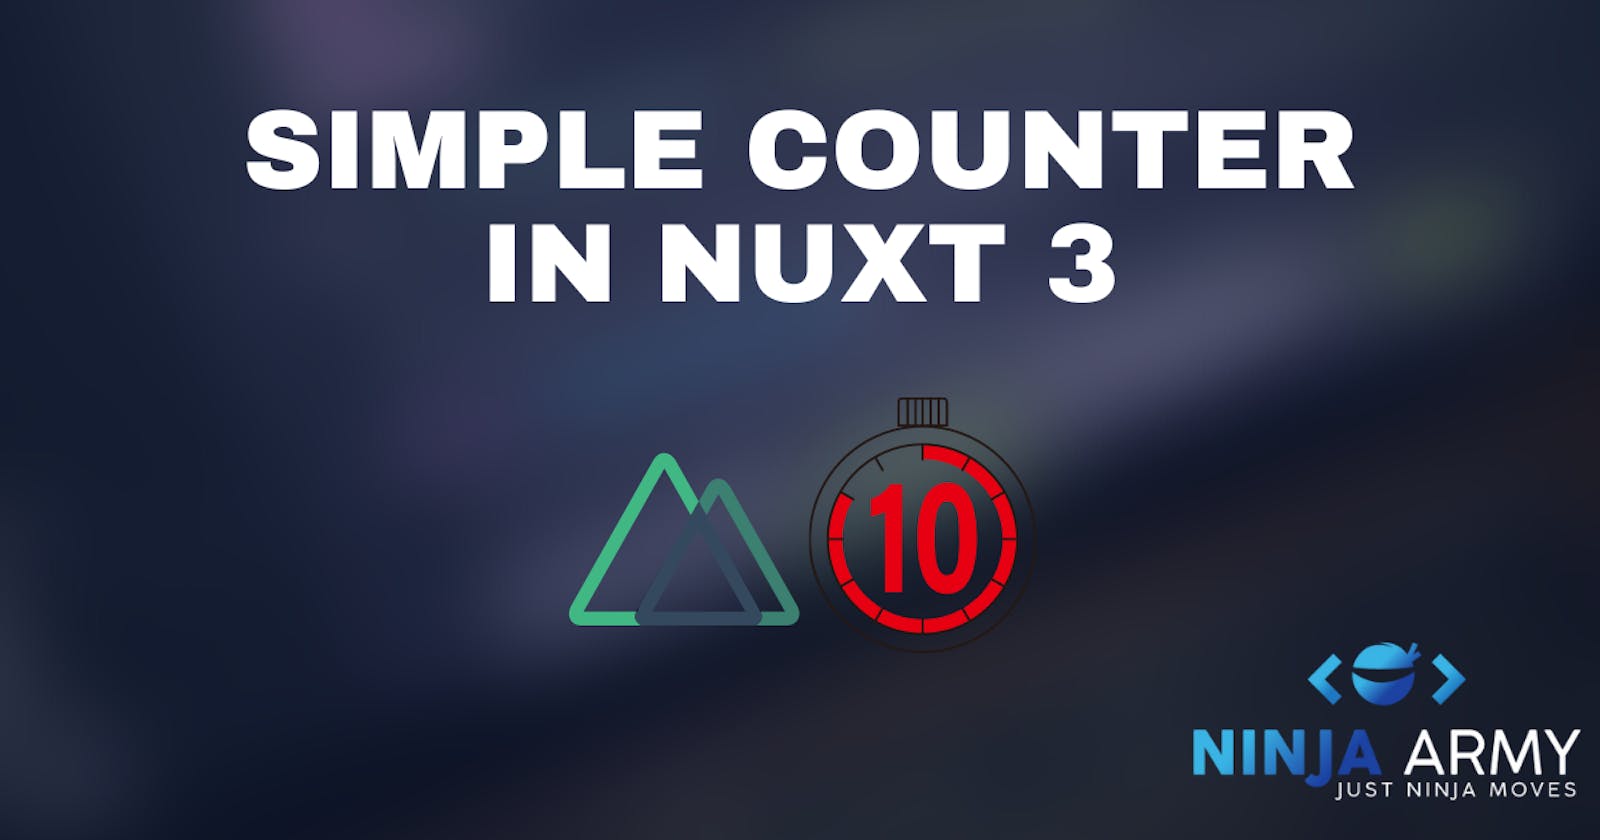 Simple Counter Animation in Nuxt3